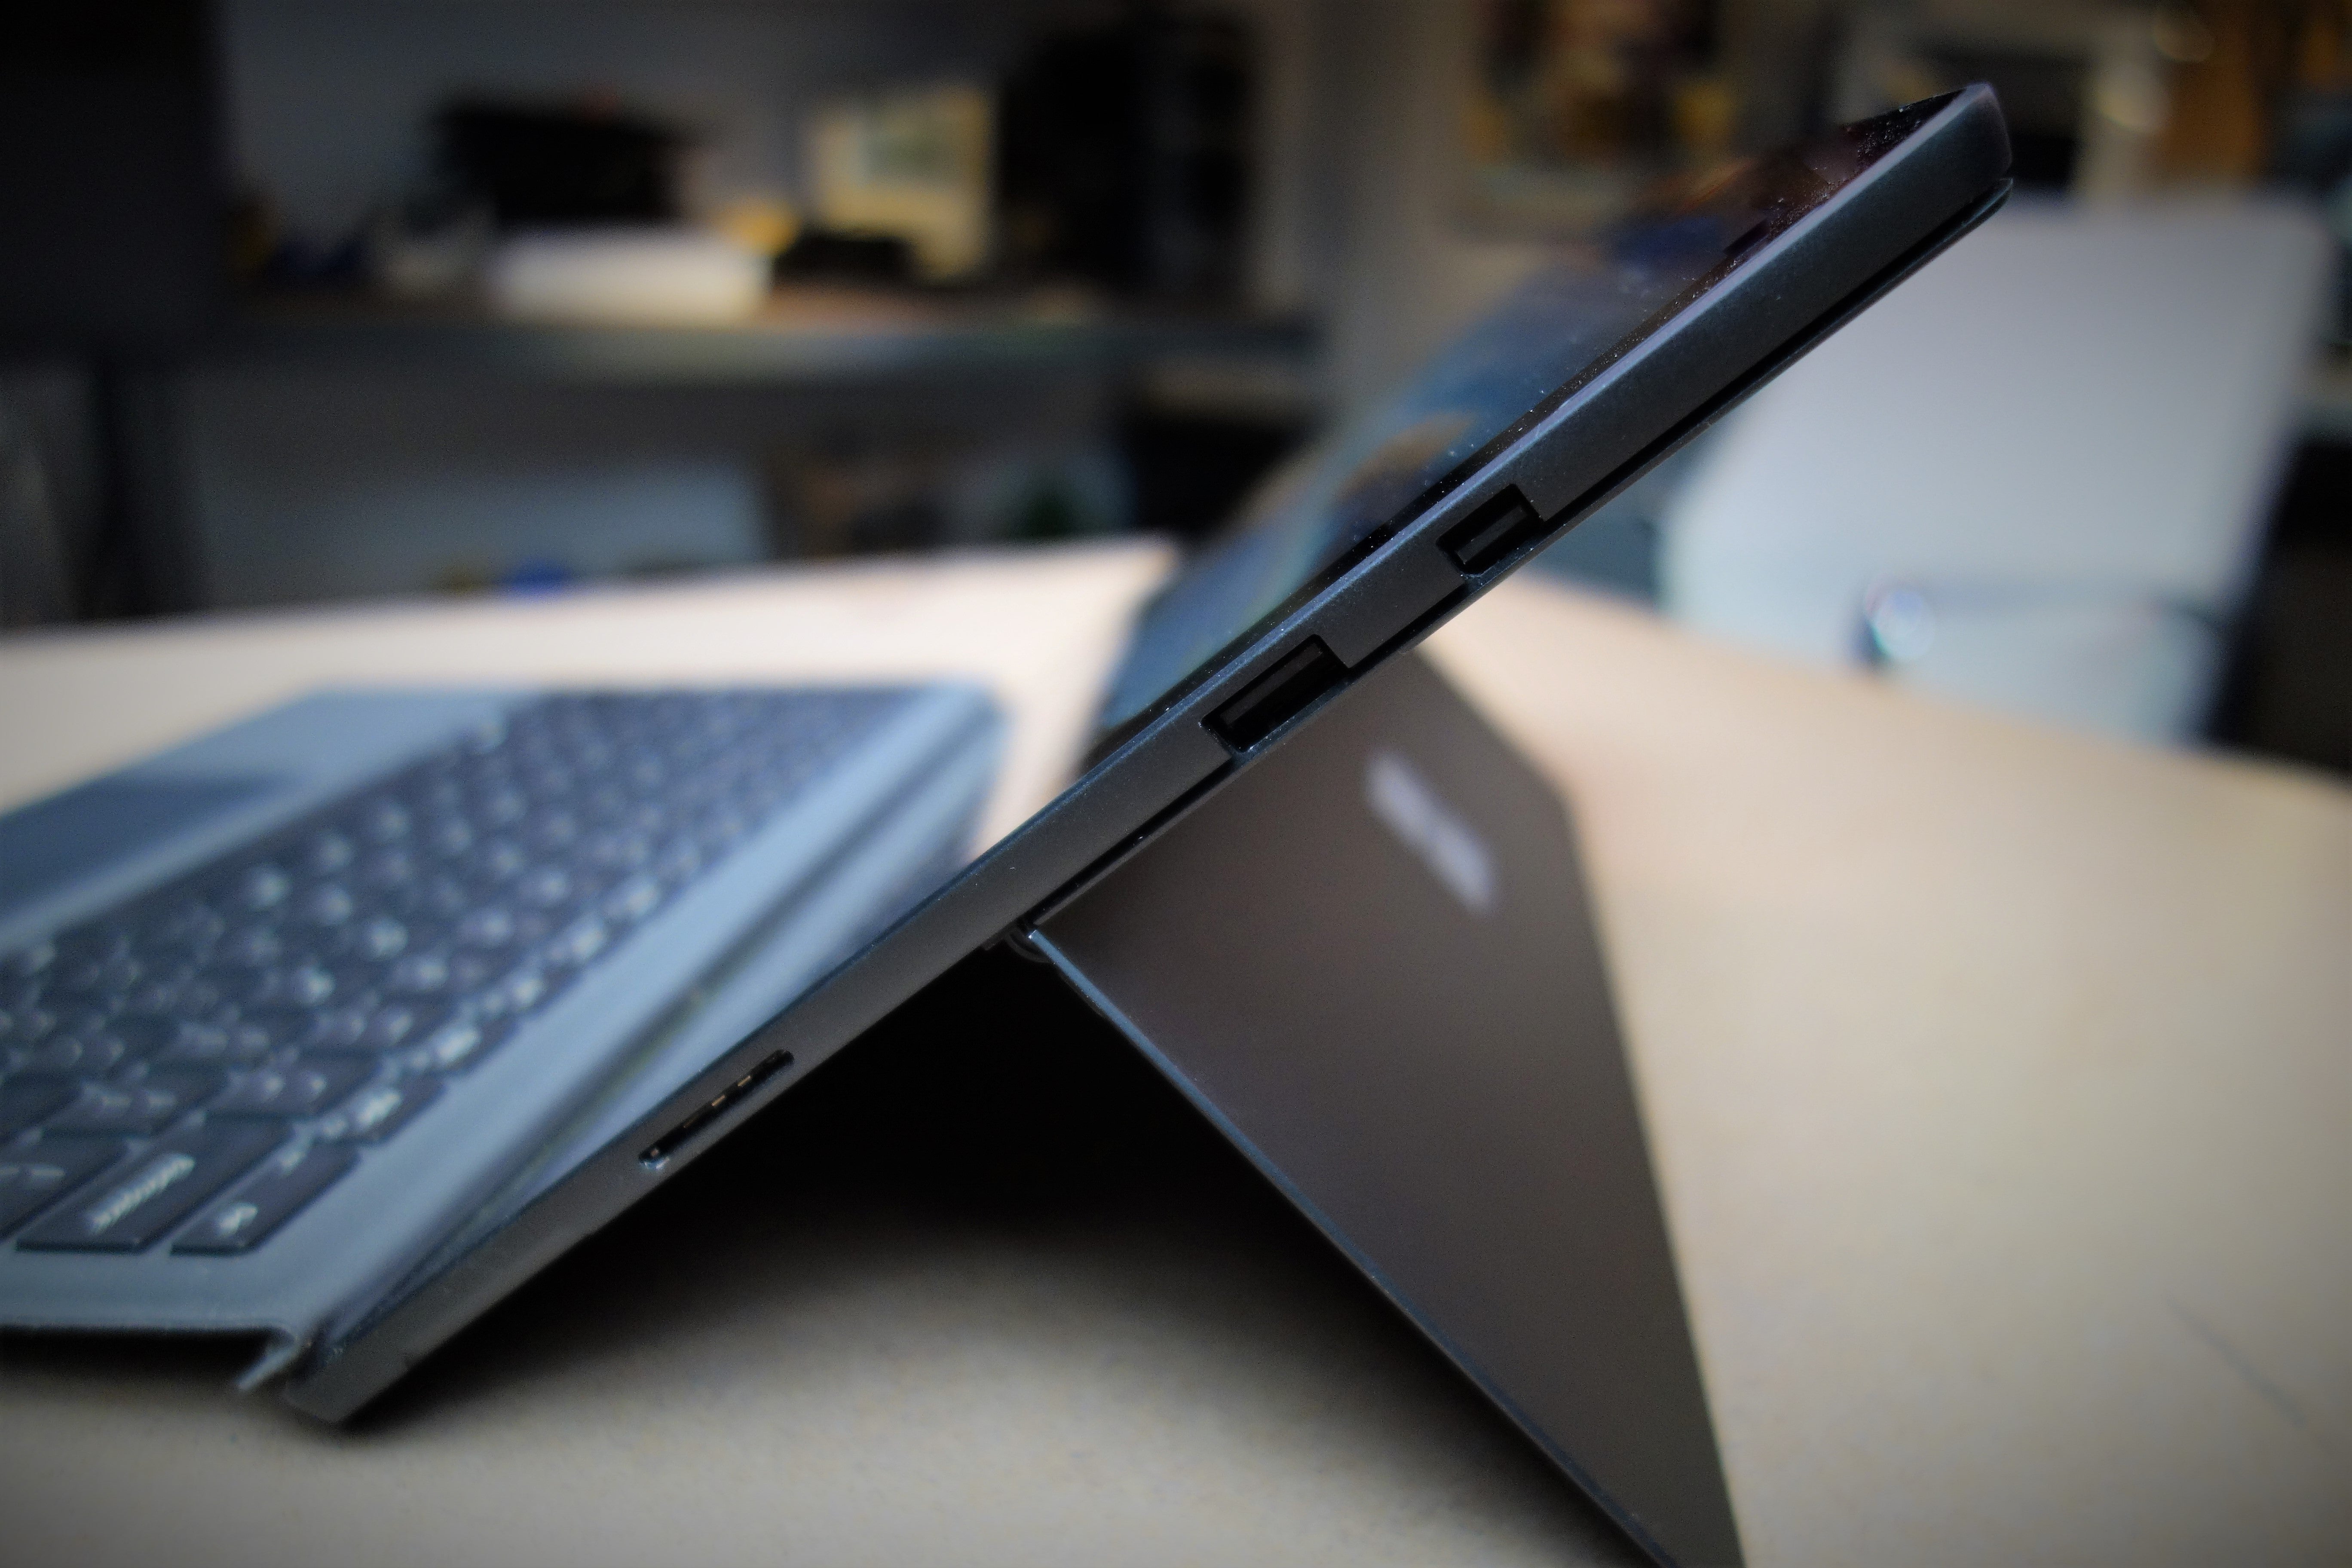 Microsoft Surface Pro 6 review: Microsoft adds quad-core power to its